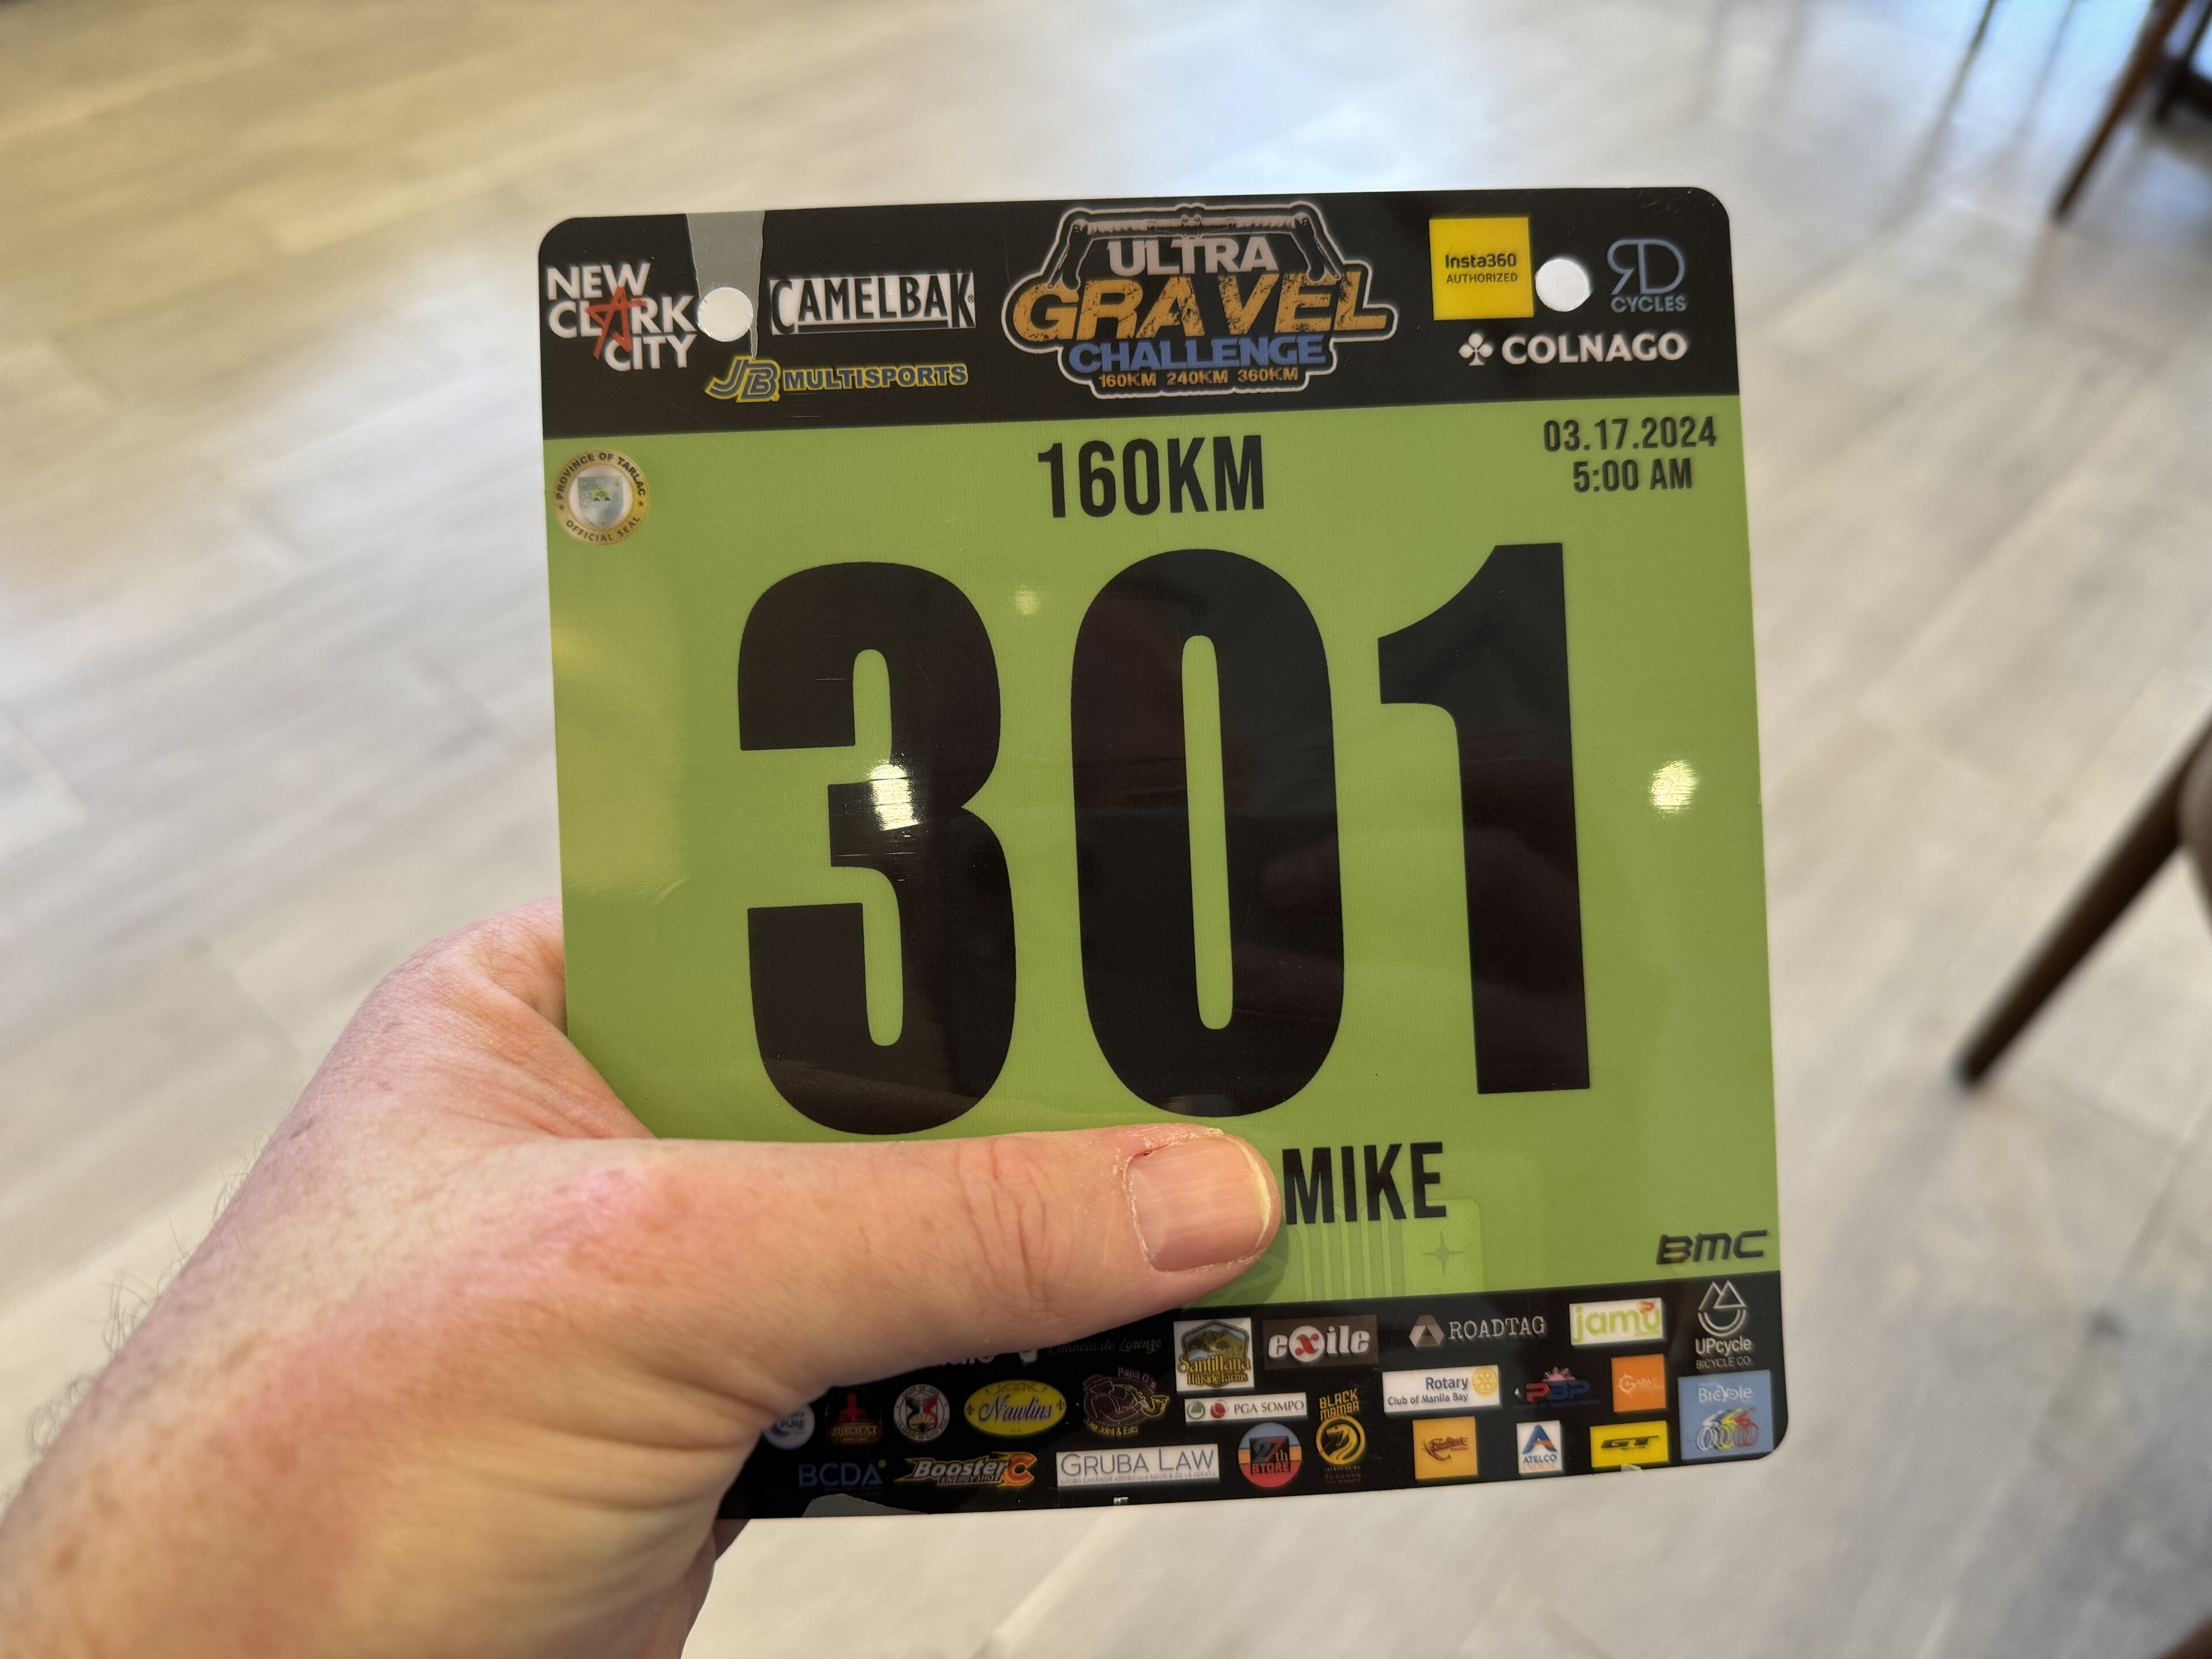 Pistonheads - The image features a person holding up a race number tag. The number is 301, and the individual has a microchip attached to it for tracking purposes. This suggests that the person may be participating in a running event or competition. In addition, there are various logos and sponsor names on the number tag, indicating that this event is likely supported by multiple organizations. The background appears to be an indoor setting with a white surface, possibly a wall or floor of a building hosting the race.